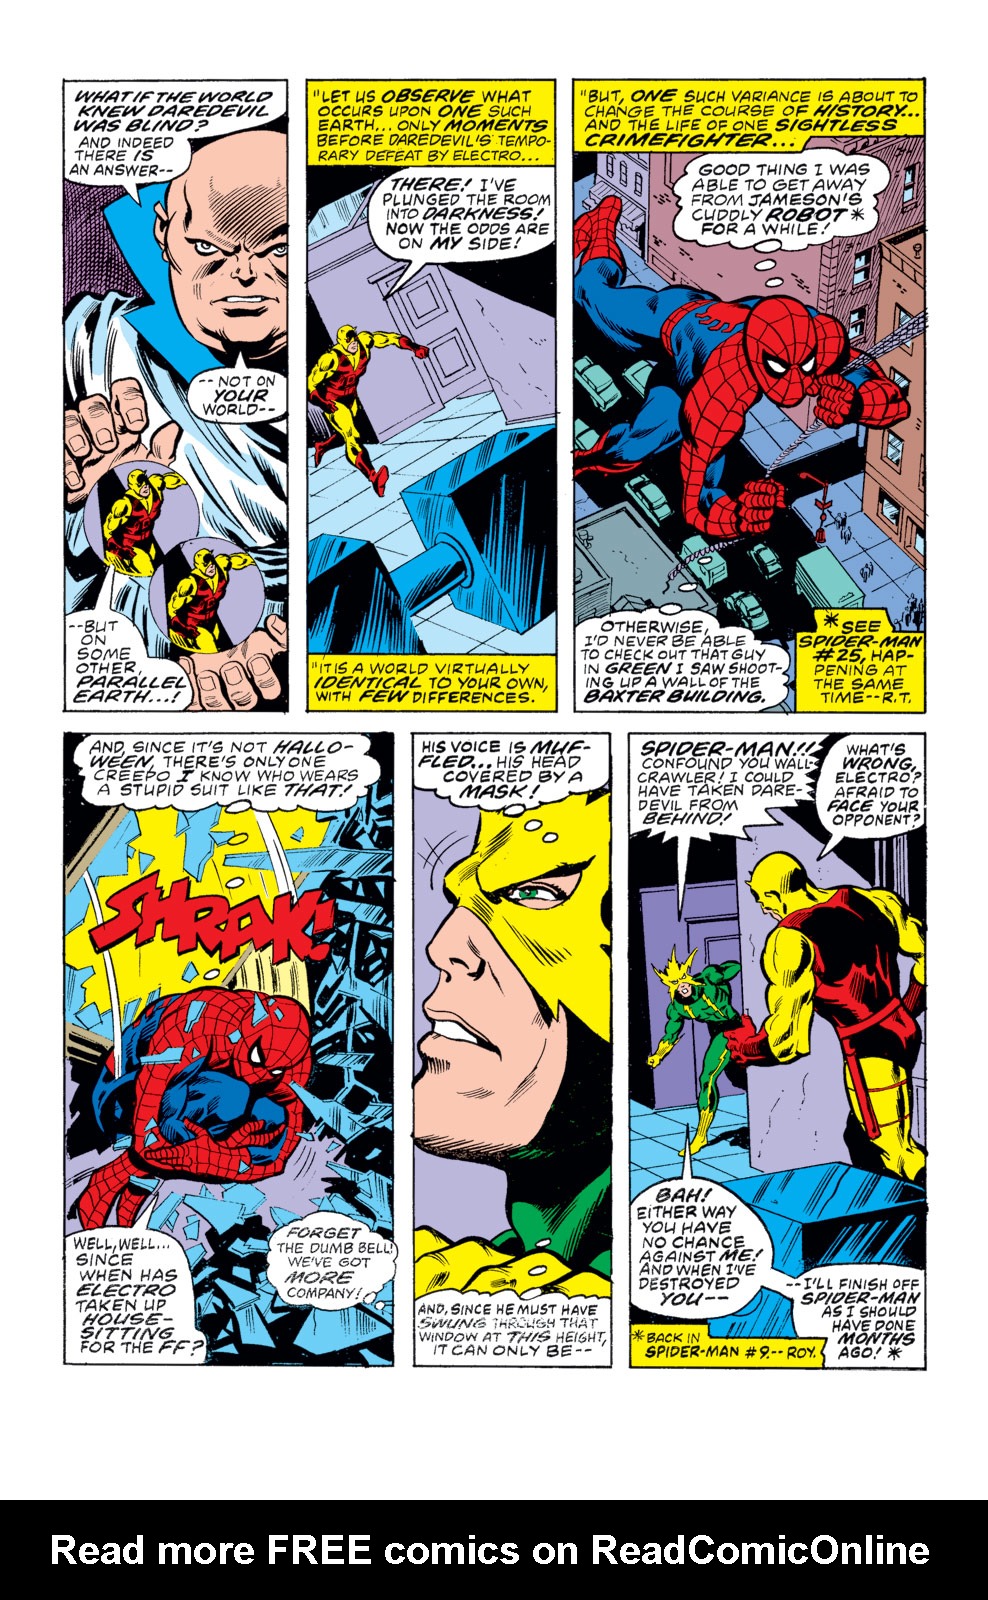 What If? (1977) issue 8 - The world knew that Daredevil is blind - Page 6